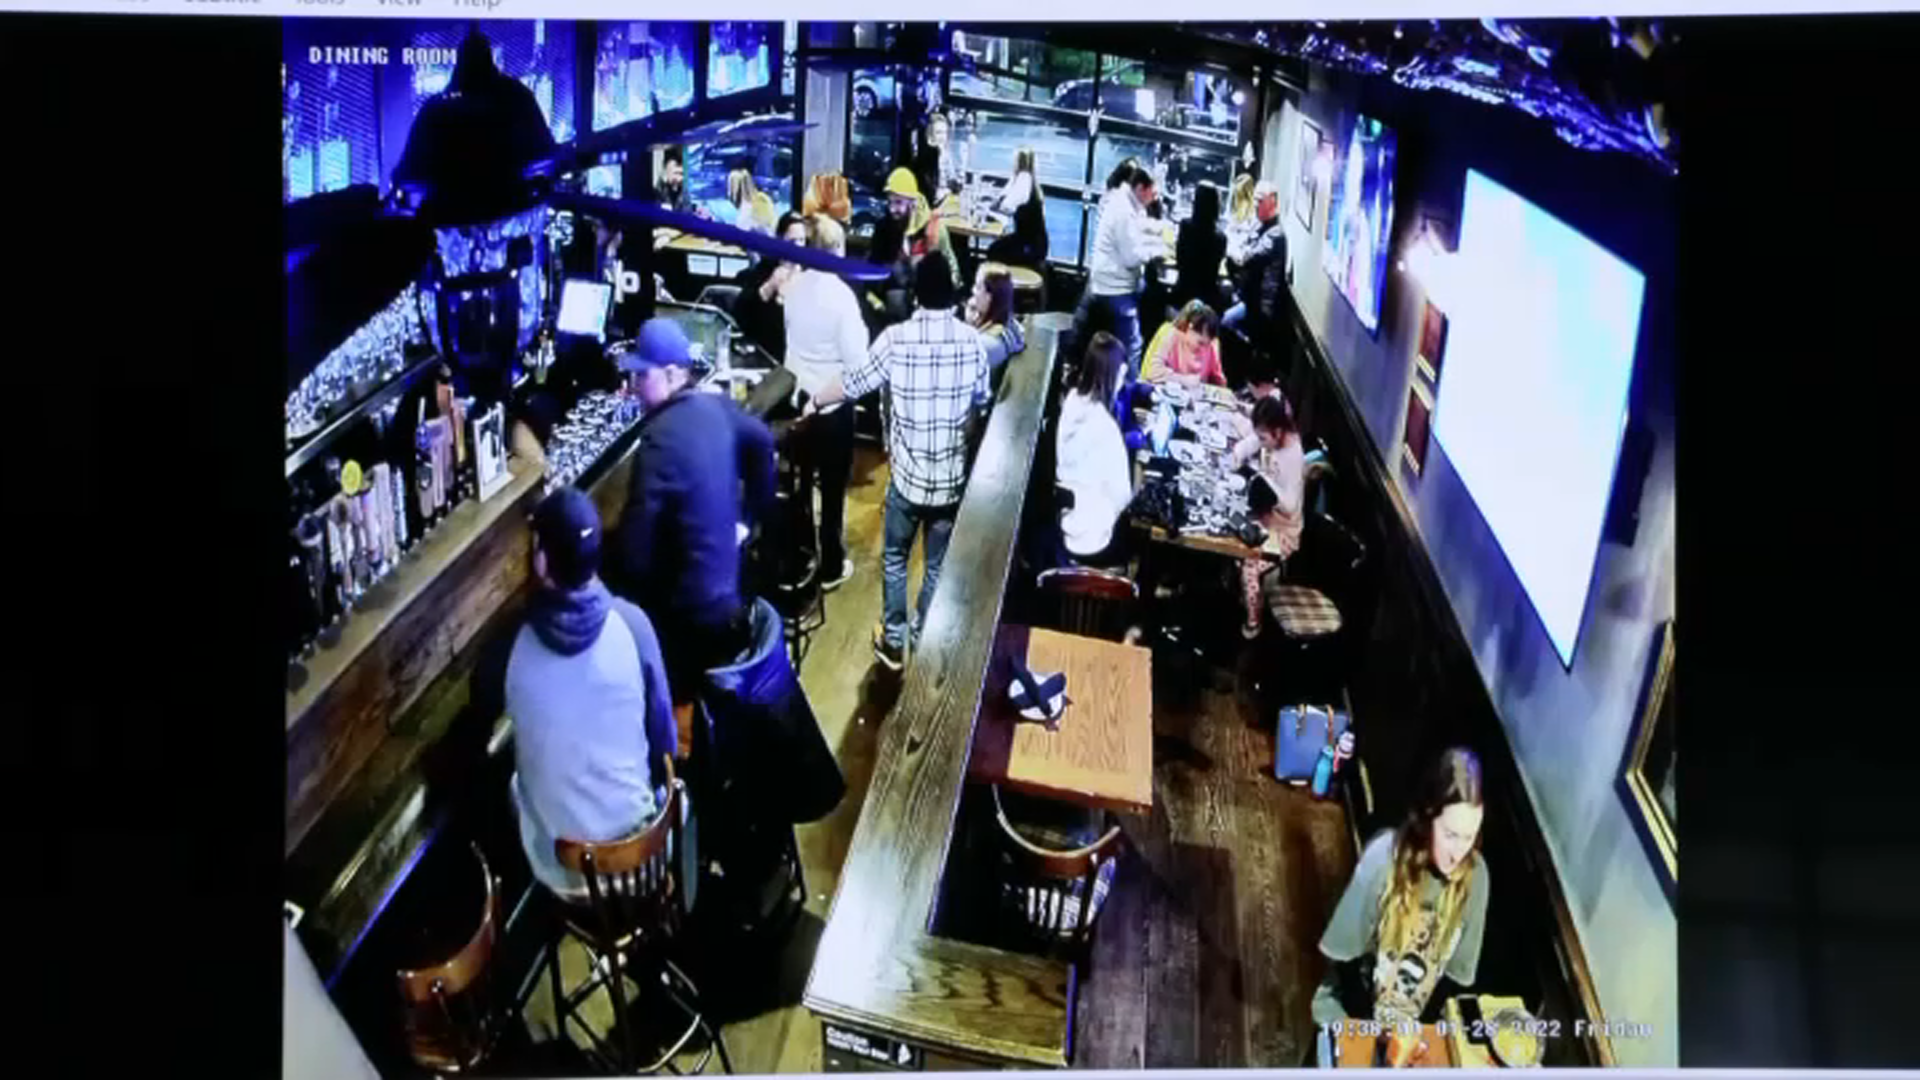 John O'Keefe and friend Michael Camerano, bottom left, at Canton, Massachusetts, bar C.F. McCarthy's on the night of Jan. 28, 2022, the night before O'Keefe died. The surveillance footage was shown at the murder trial of O'Keefe's girlfriend, Karen Read, in Norfolk Superior Court on Wednesday, May 8, 2024.